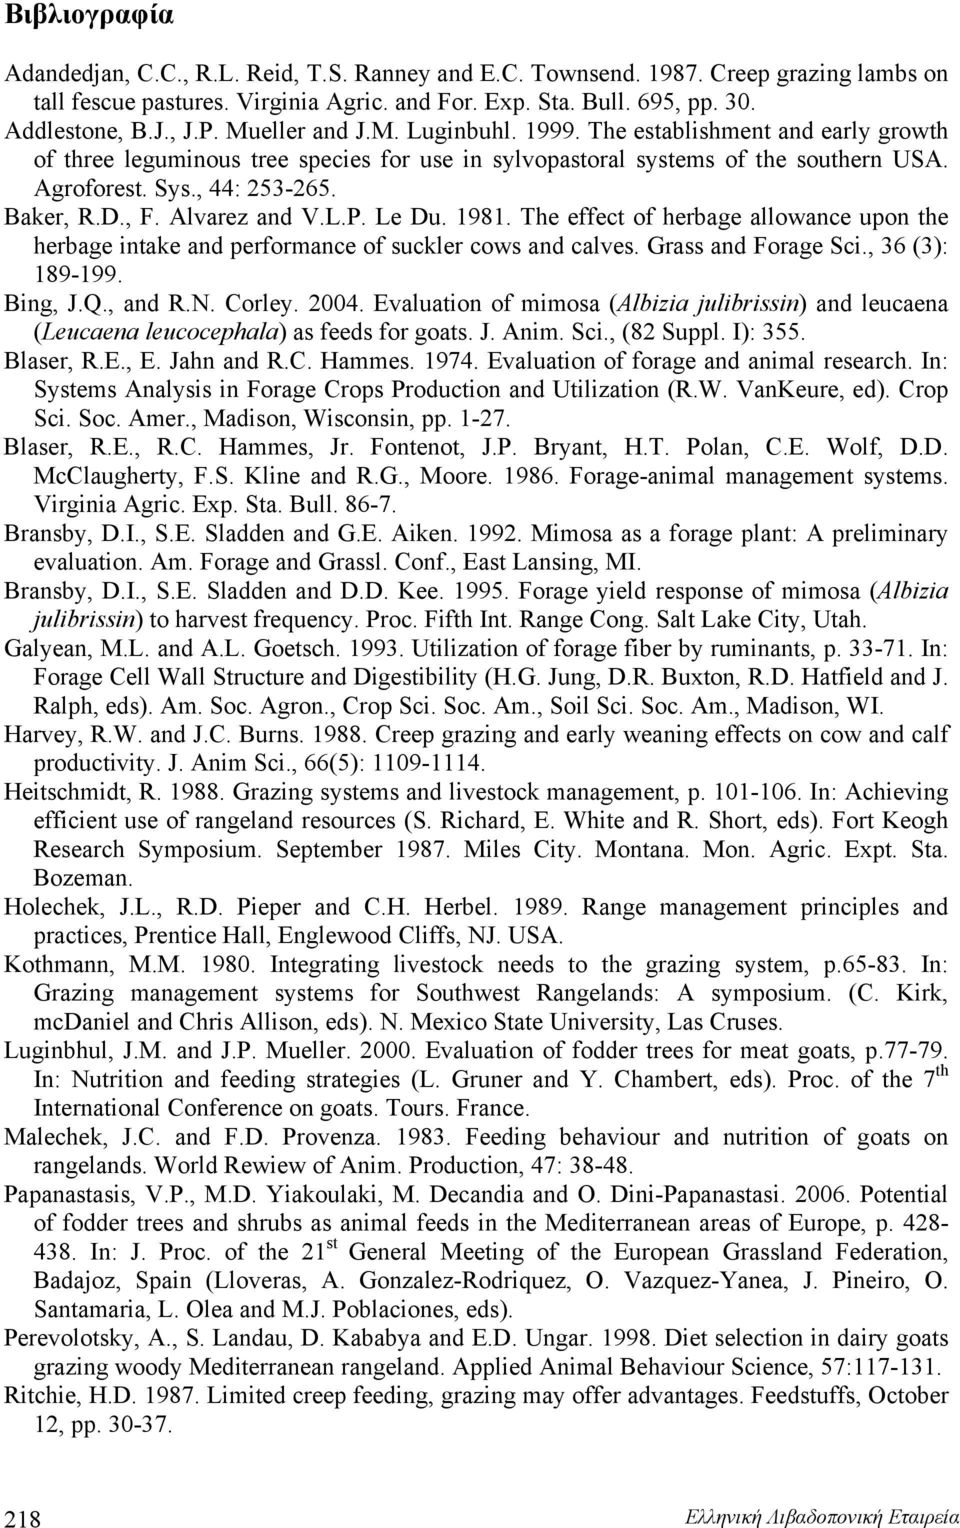 , F. Alvarez and V.L.P. Le Du. 1981. The effect of herbage allowance upon the herbage intake and performance of suckler cows and calves. Grass and Forage Sci., 36 (3): 189-199. Bing, J.Q., and R.N.